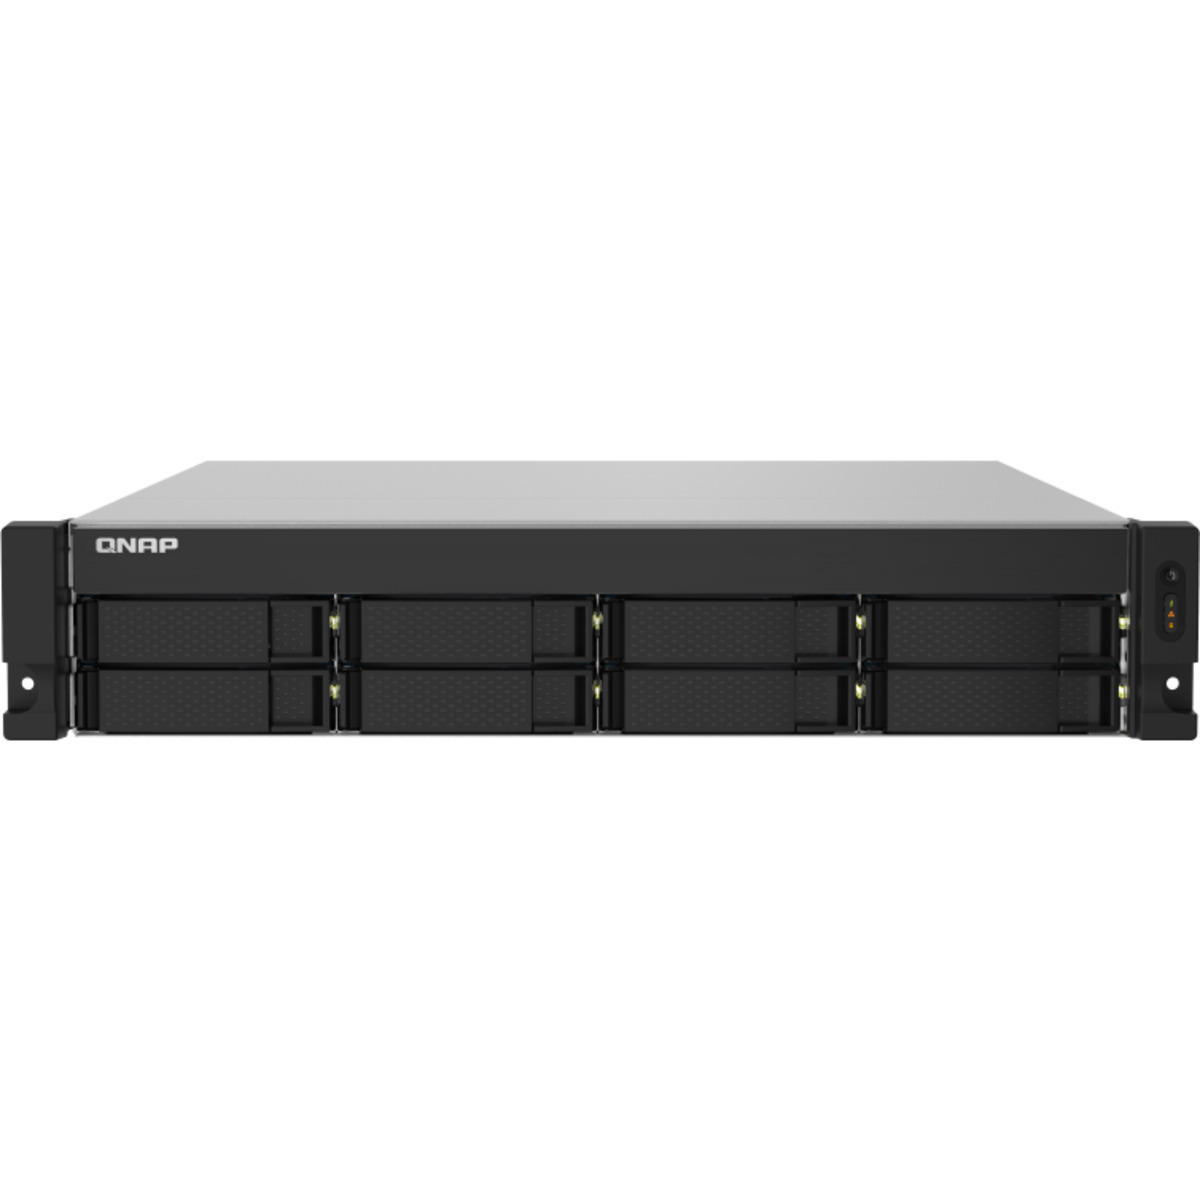 buy $5350 QNAP TS-832PXU-RP 160tb RackMount NAS - Network Attached Storage Device 8x20000gb Western Digital Red Pro WD201KFGX 3.5 7200rpm SATA 6Gb/s HDD NAS Class Drives Installed - Burn-In Tested - FREE RAM UPGRADE - nas headquarters buy network attached storage server device das new raid-5 free shipping simply usa TS-832PXU-RP